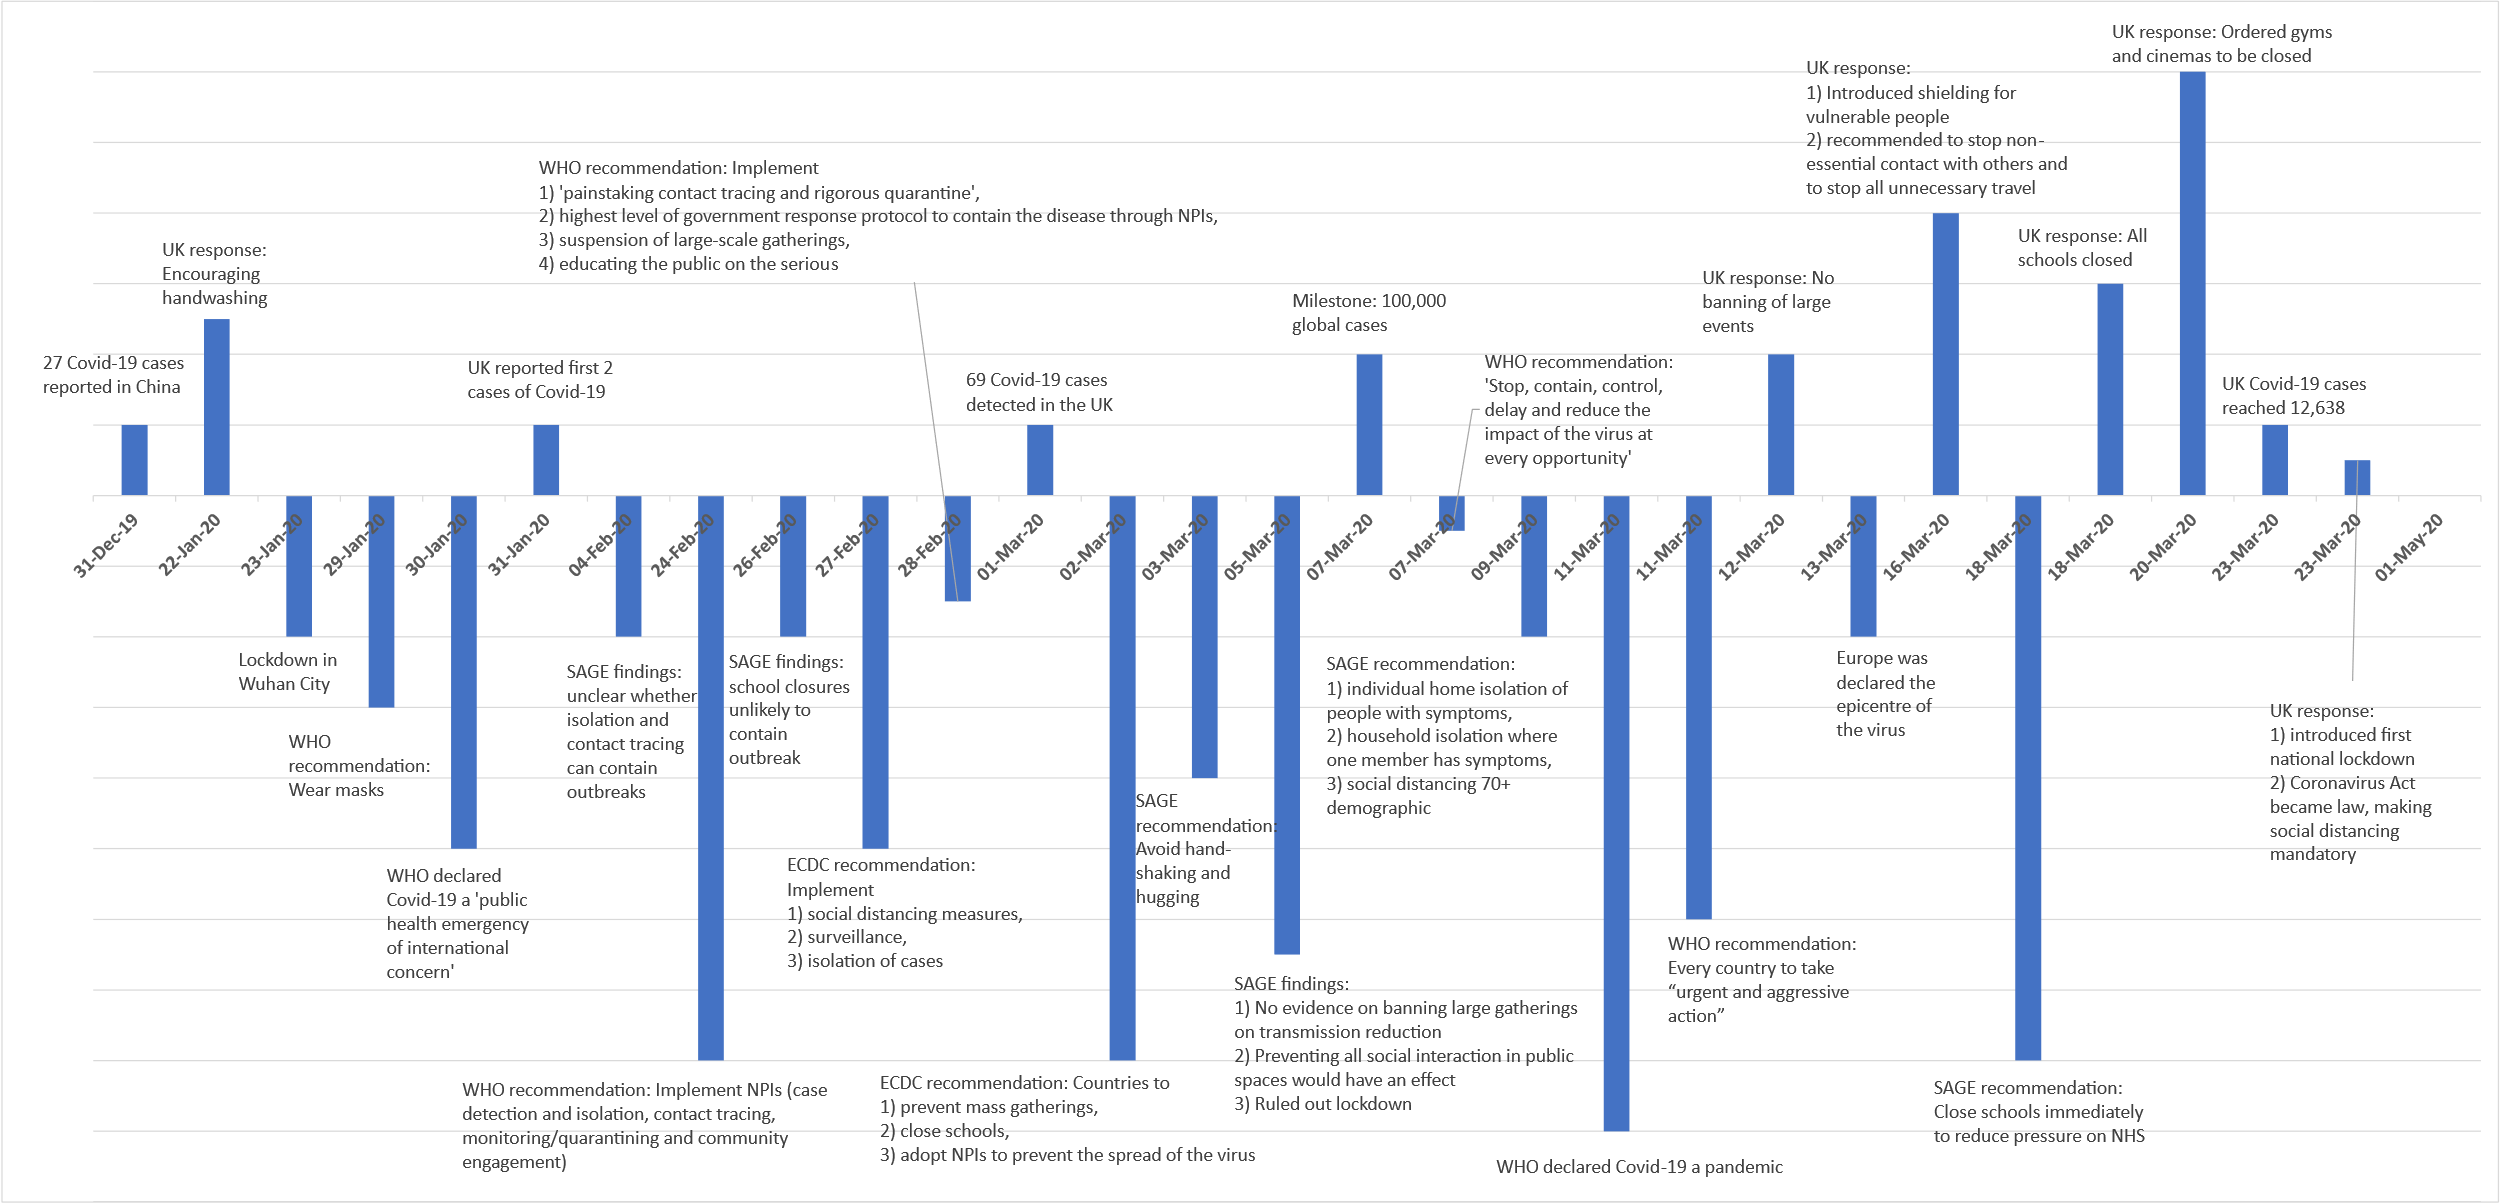 Timeline
showing the time lag between the advice from WHO and the UK Government response